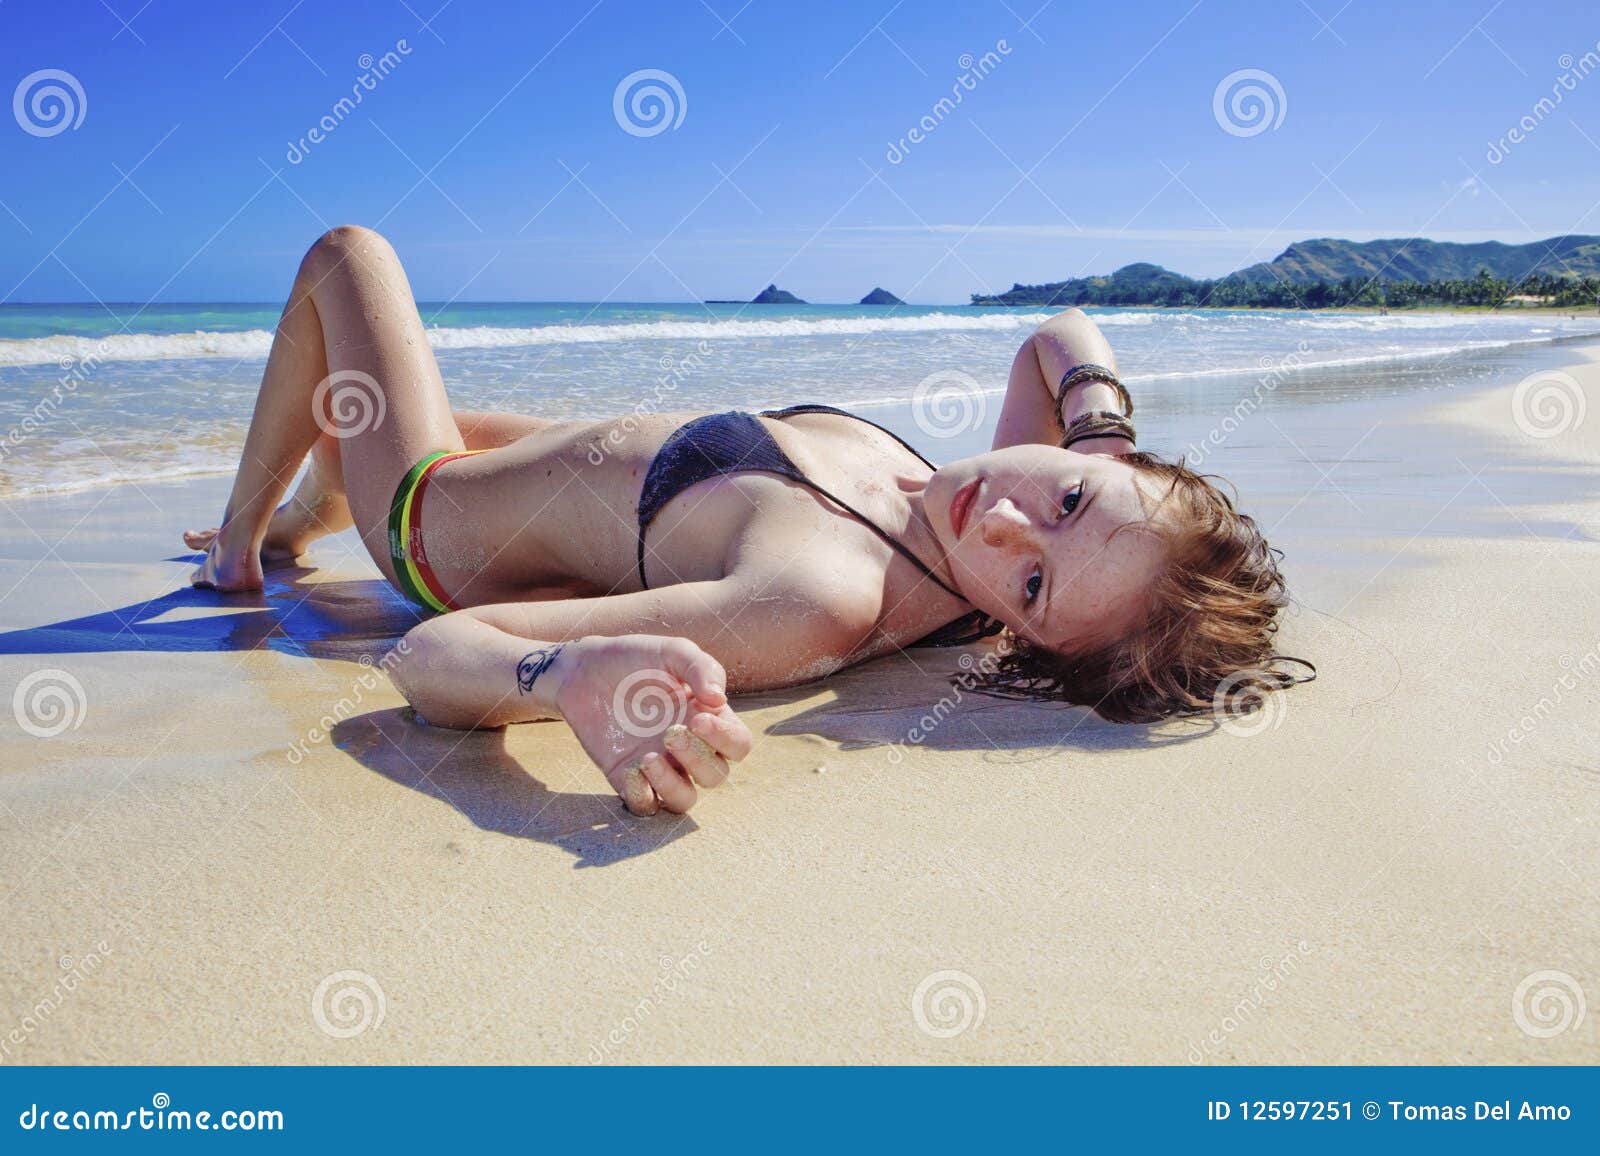 https://thumbs.dreamstime.com/z/young-woman-lounging-beach-12597251.jpg